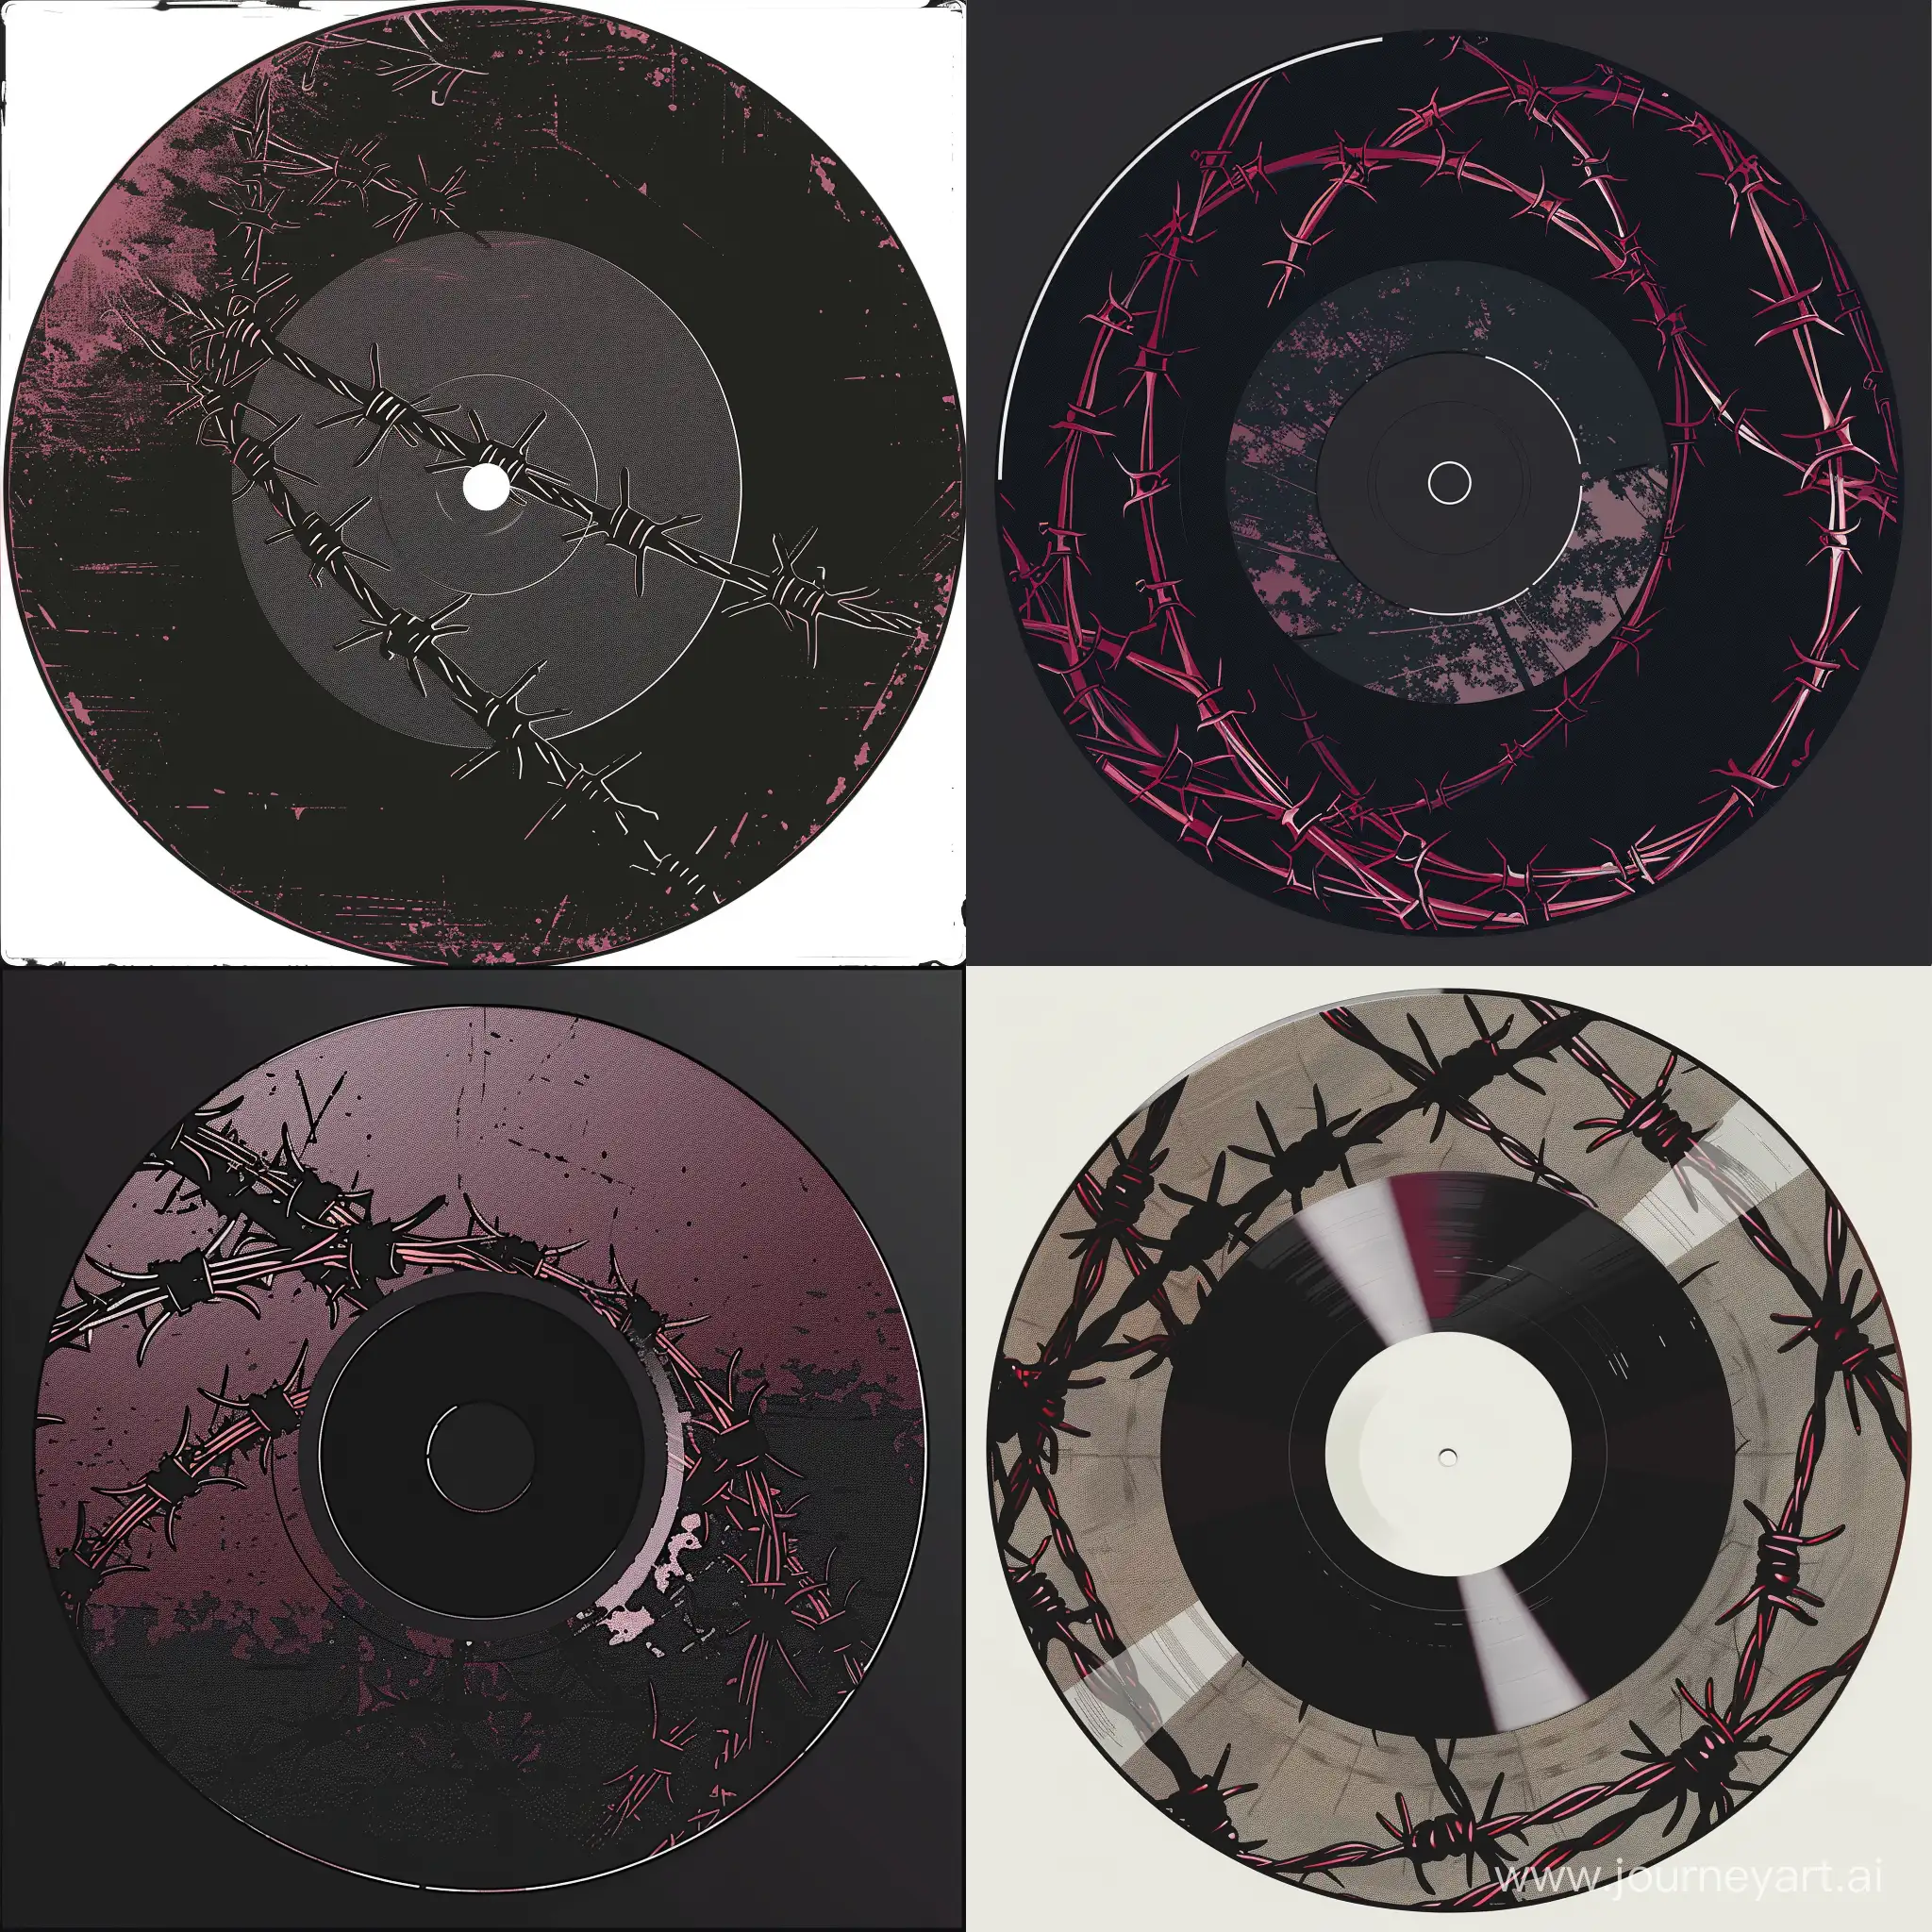 Punk-Style-Round-CD-Illustration-with-Barbed-Wire-in-Black-and-Maroon